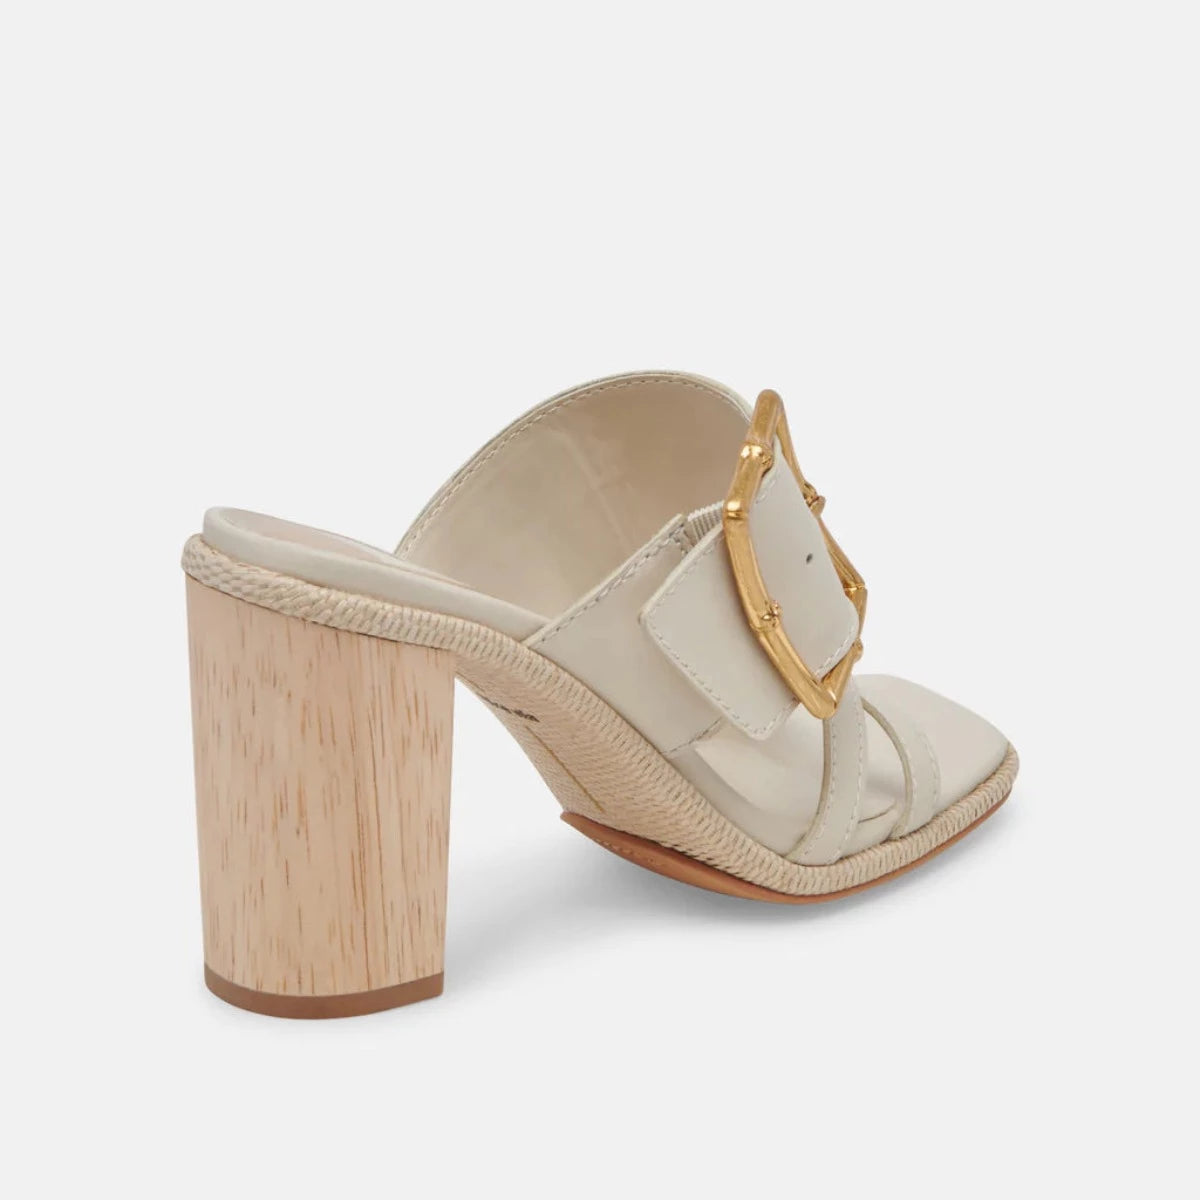 Onnie Heels in Sand Leather